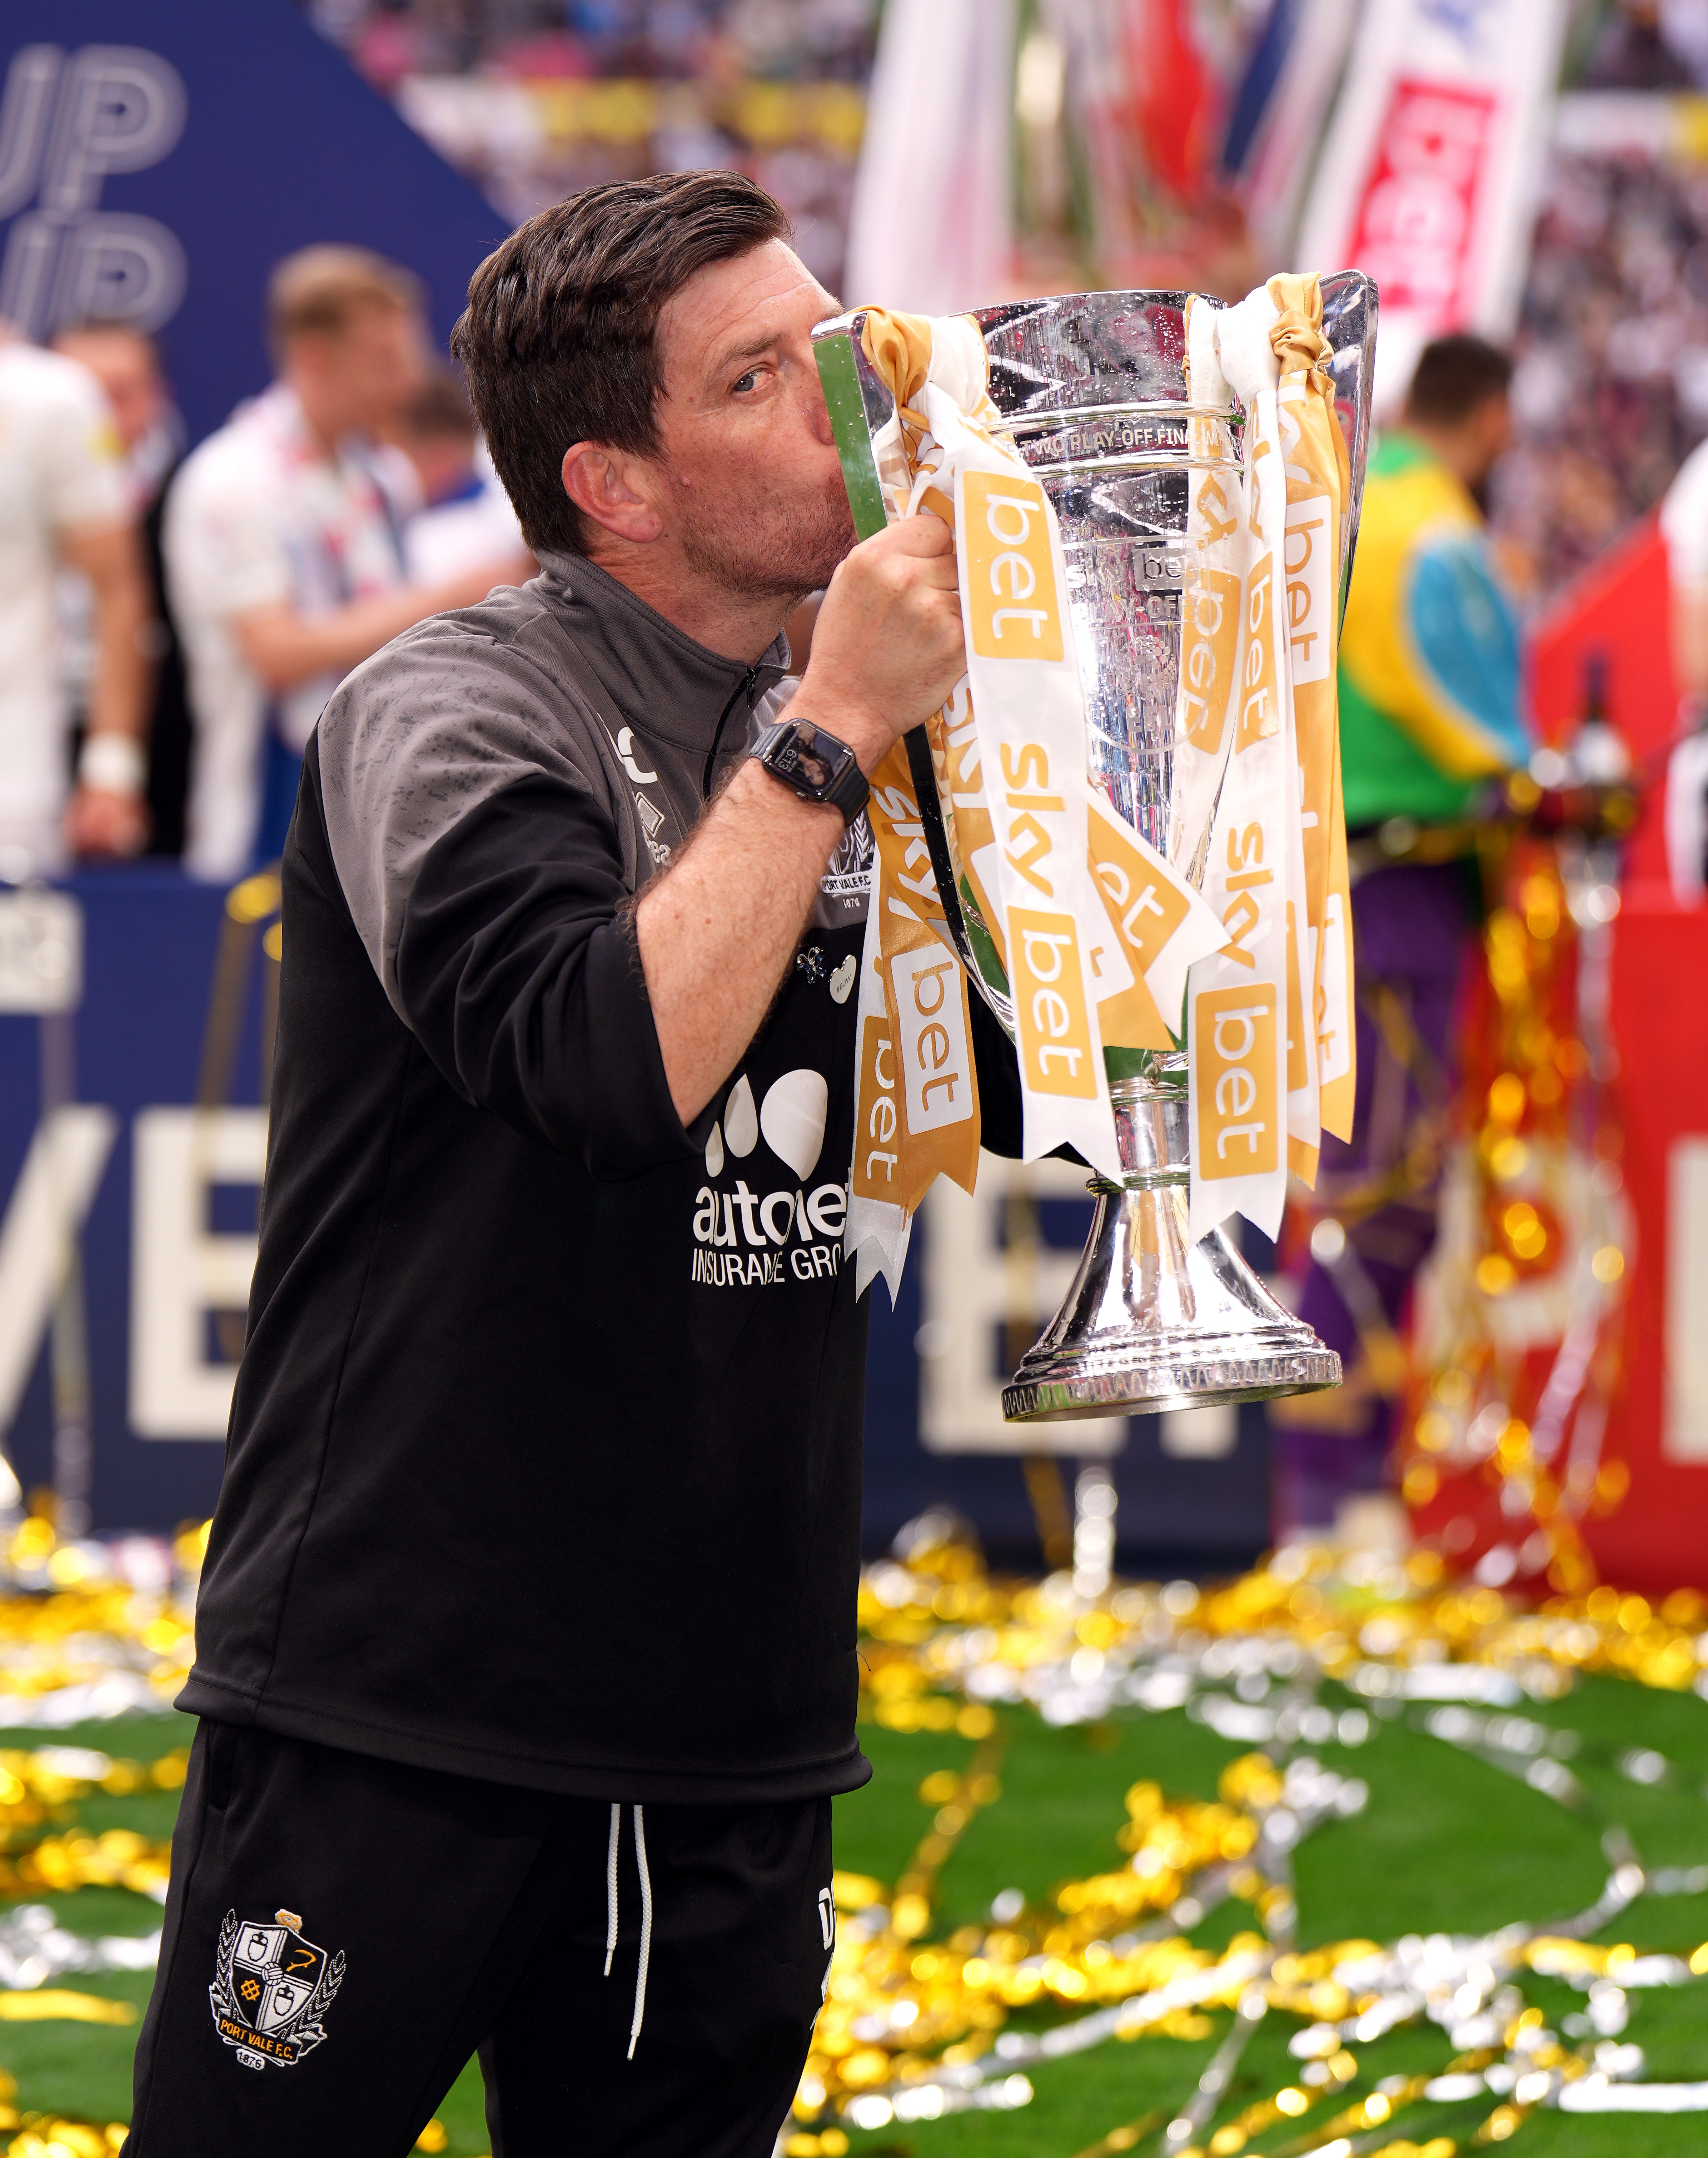 Port Vale manager Darrell Clarke, back from compassionate leave, with the League Two play-off final trophy after his side’s 3-0 win over Mansfield at Wembley (John Walton/PA)